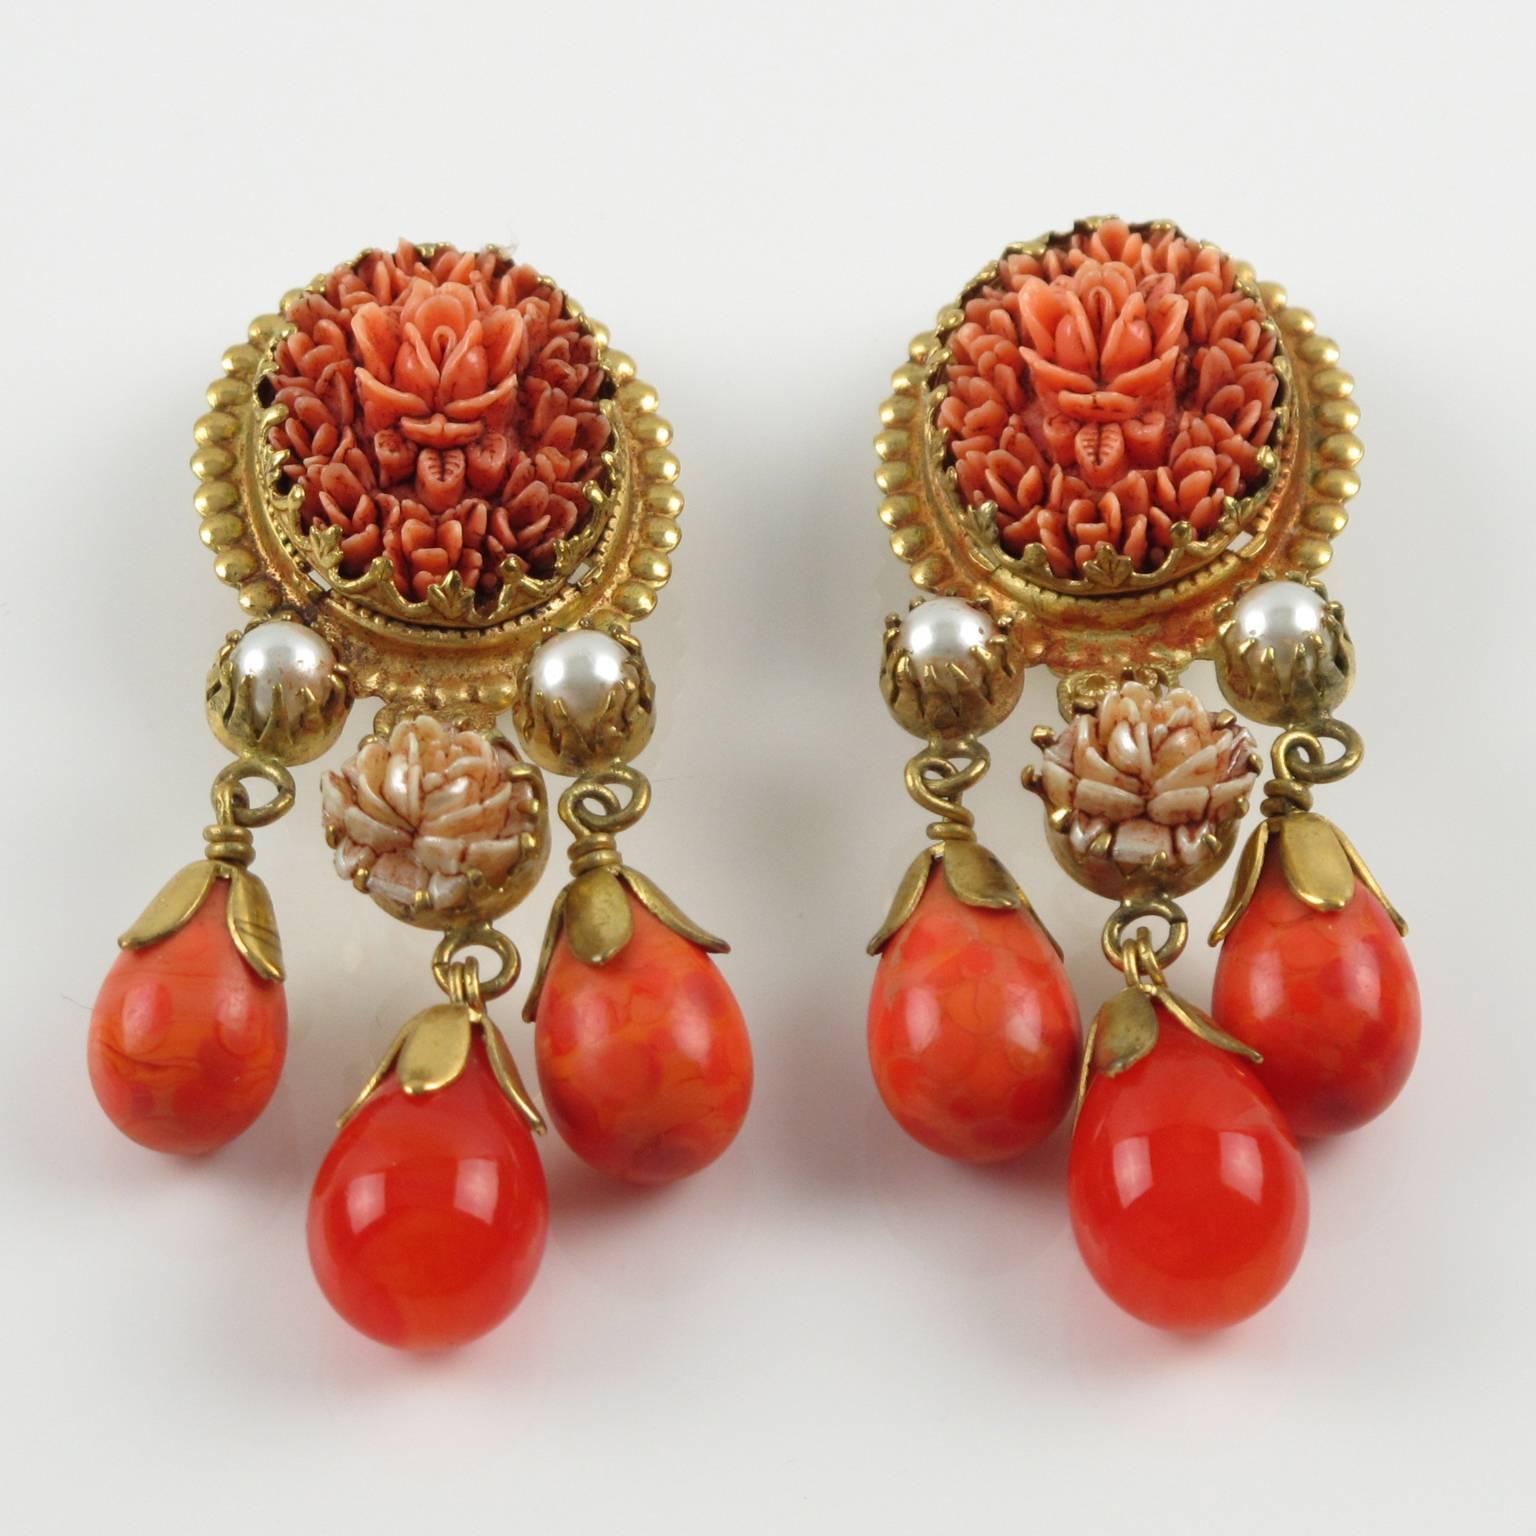 Vintage early 80s French GAS ST TROPEZ clip on earrings. Fabulous dangling shape with baroque style featuring gilt metal frame, metal all textured, ornate with charm poured glass drop beads in warm orange tone and topped with simulated pearl, and